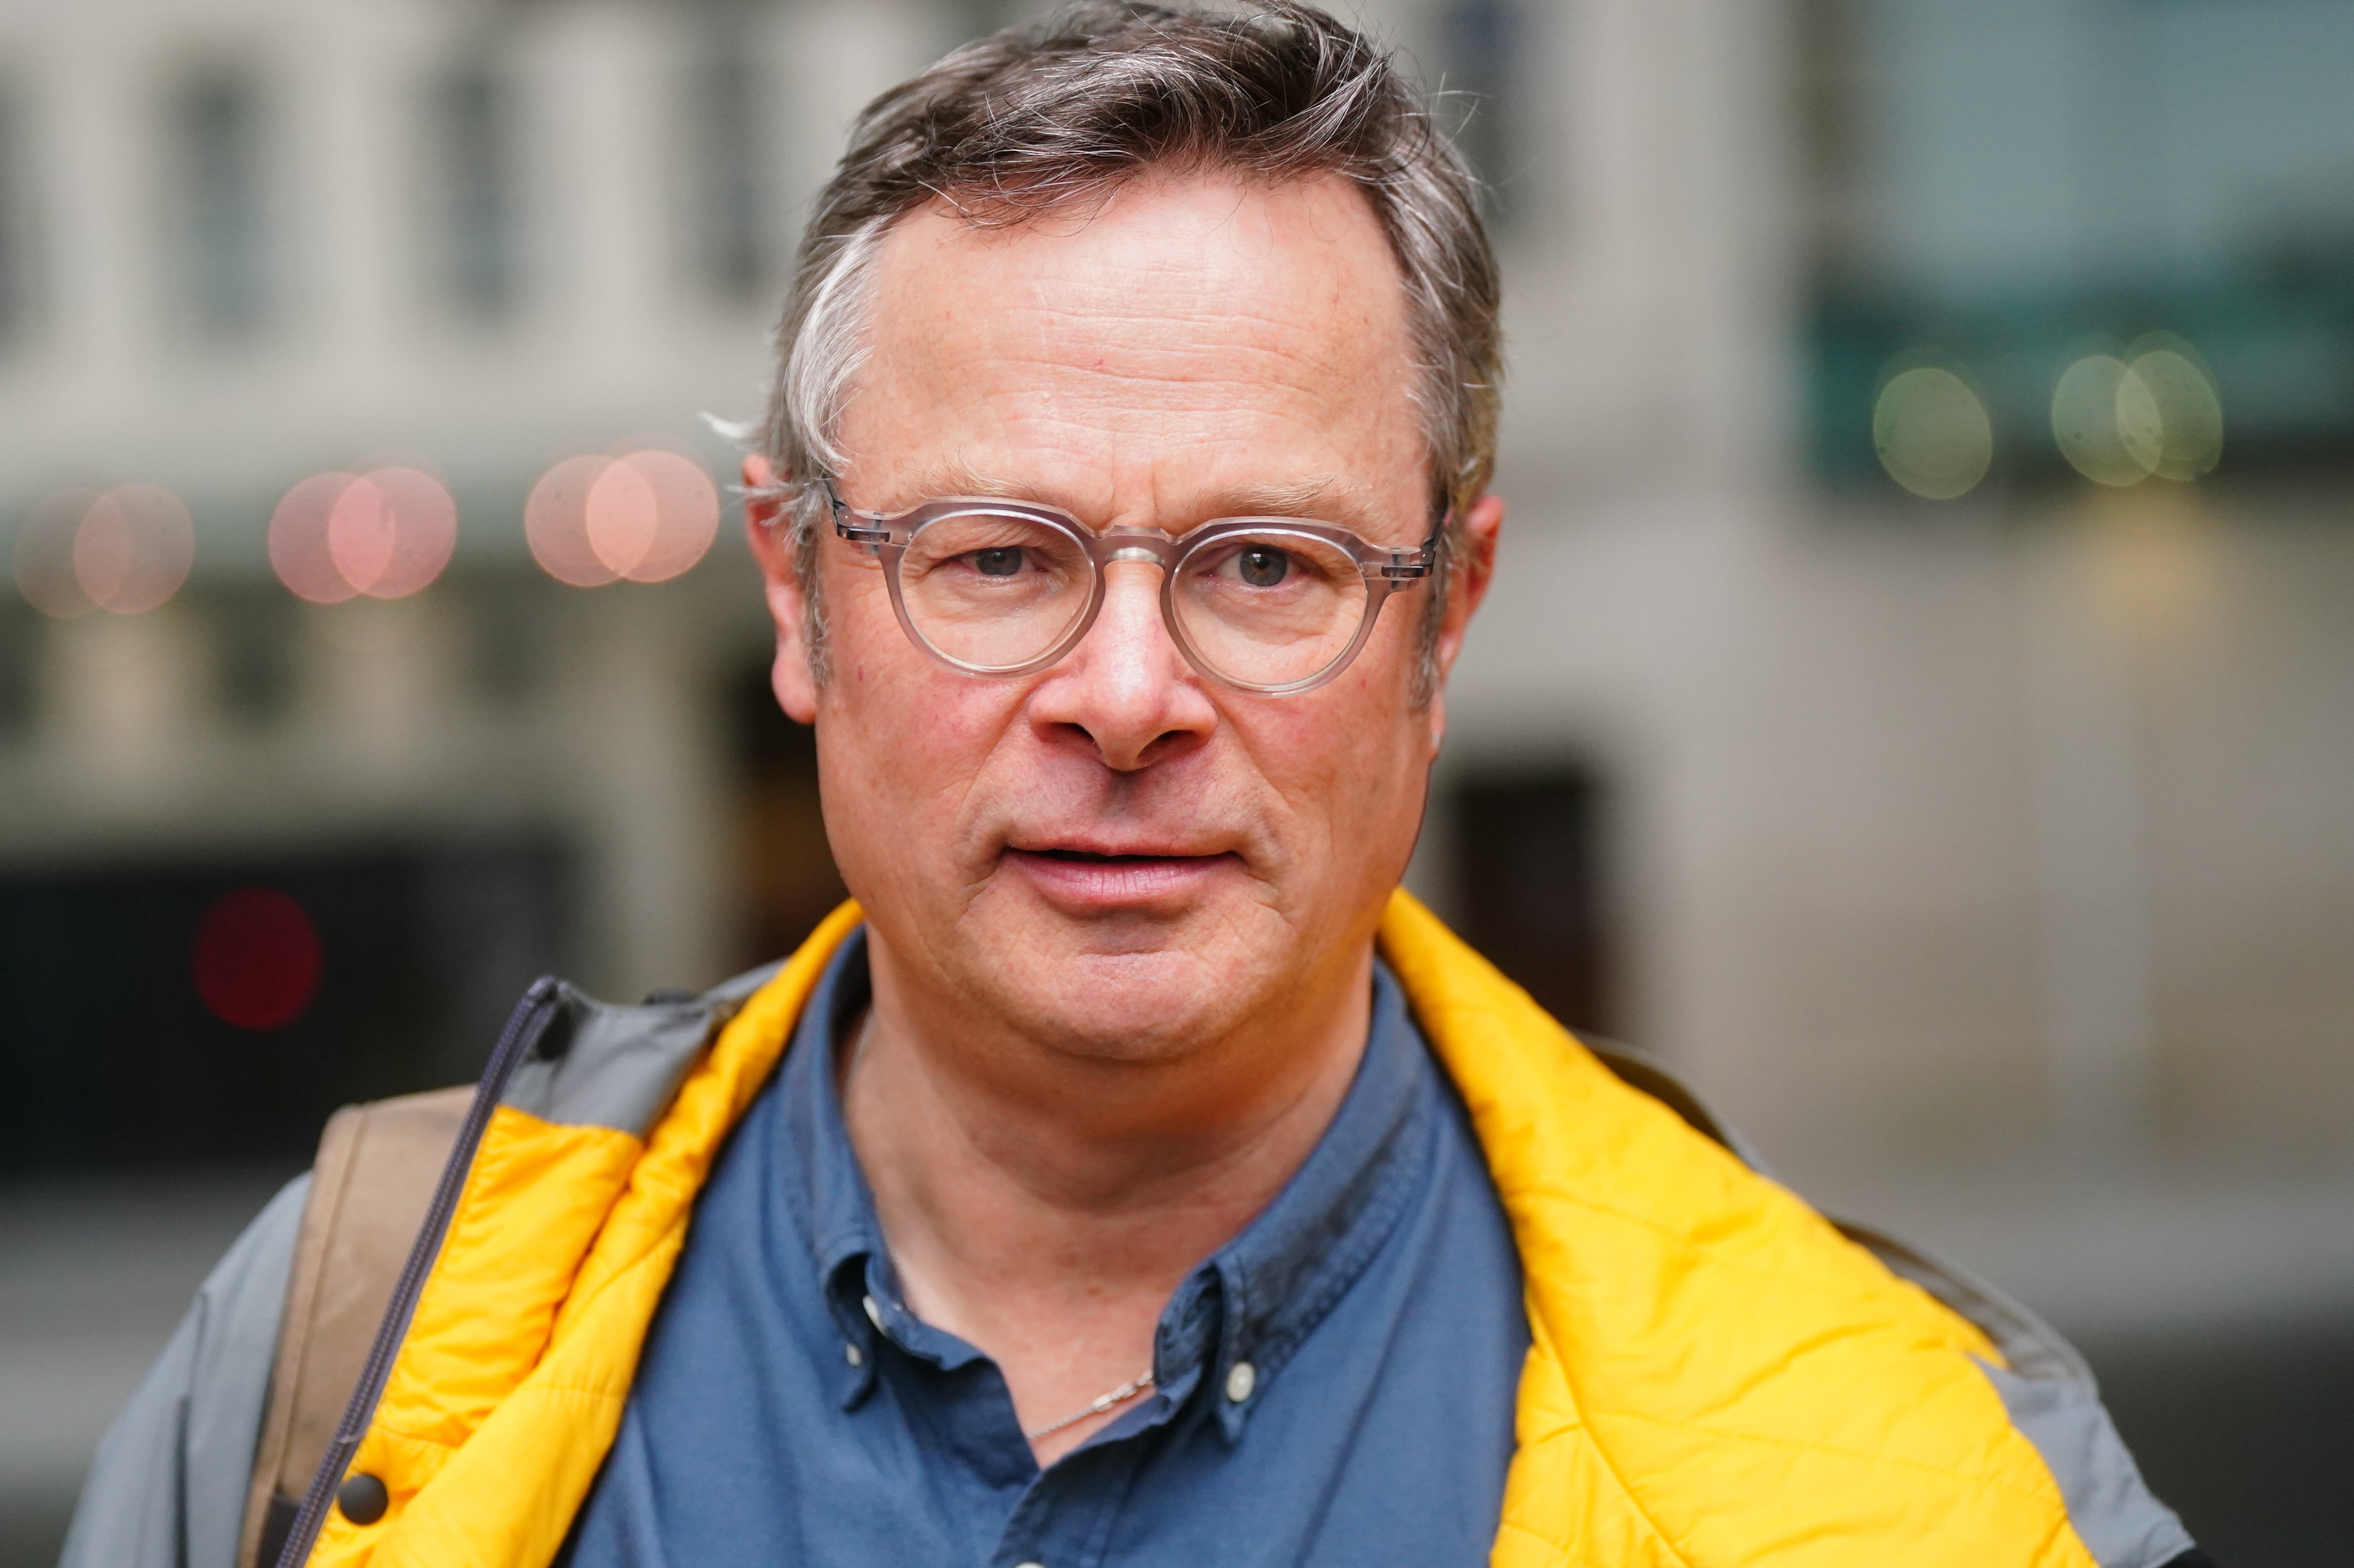 Celebrity chef Hugh Fearnley-Whittingstall says he’s committed